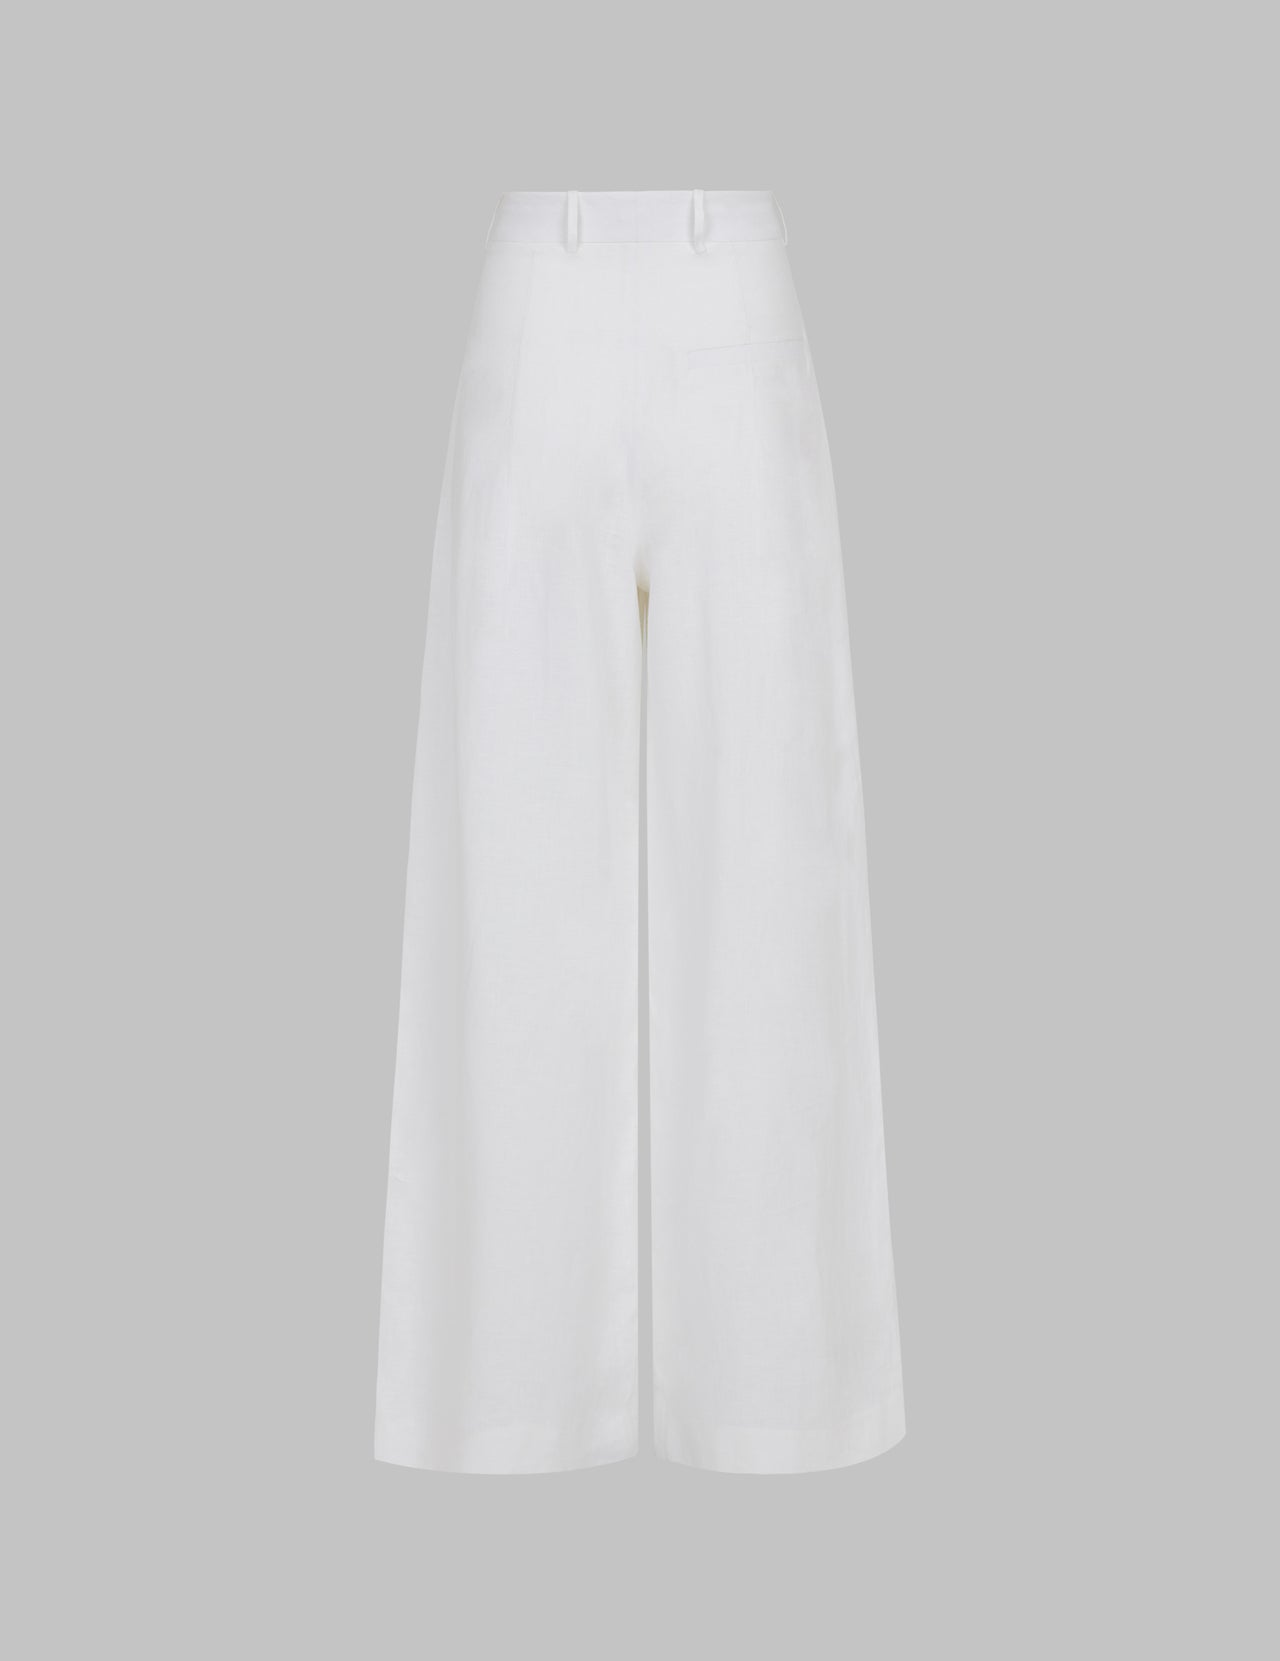  White Linen High Waisted Wide Leg Trousers 